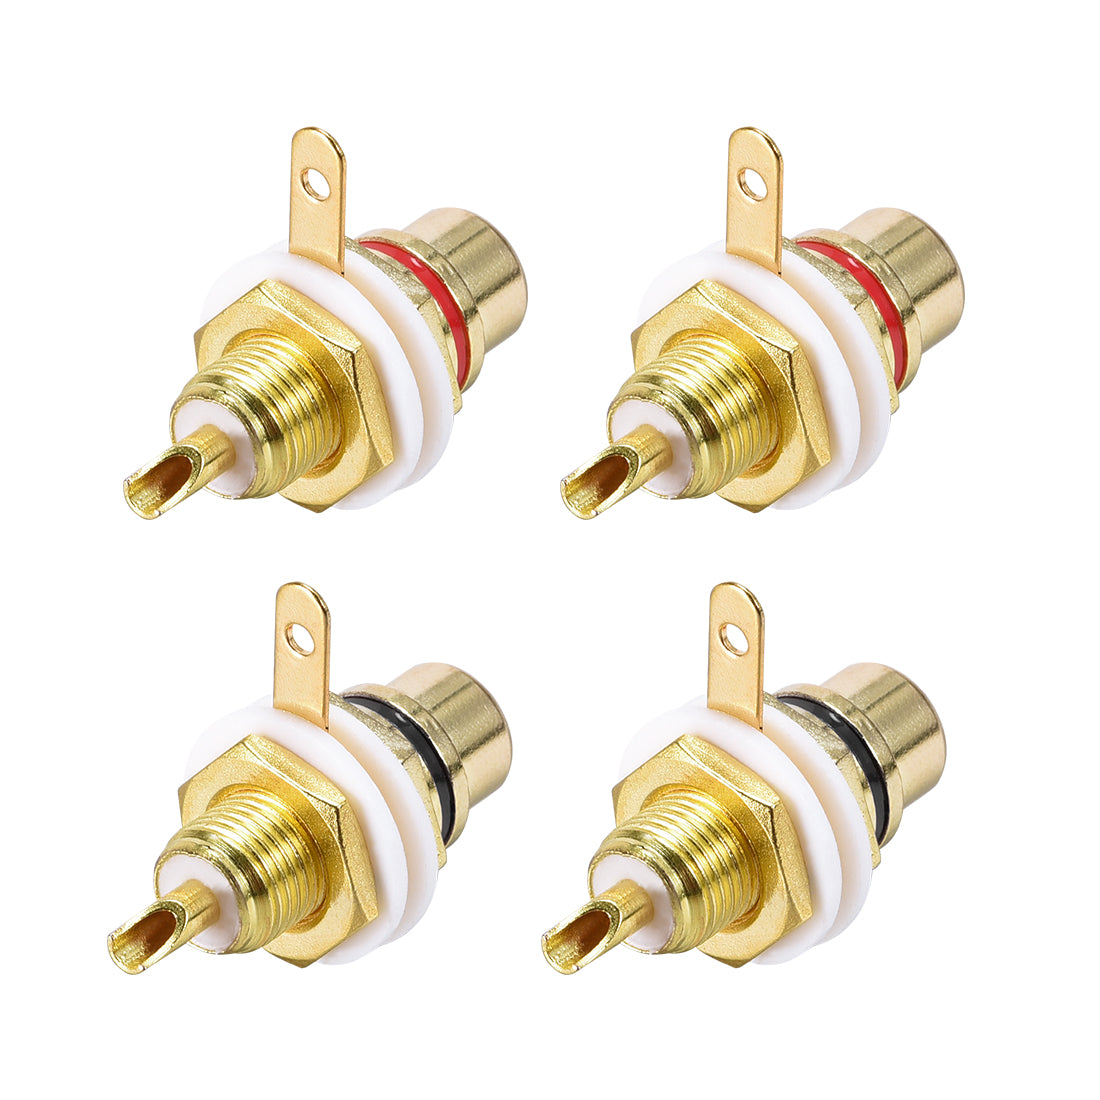 uxcell Uxcell RCA Female Panel Mount Chassis Socket Jack Connector for Amplifier Audio Terminal RCA Plug 4pcs